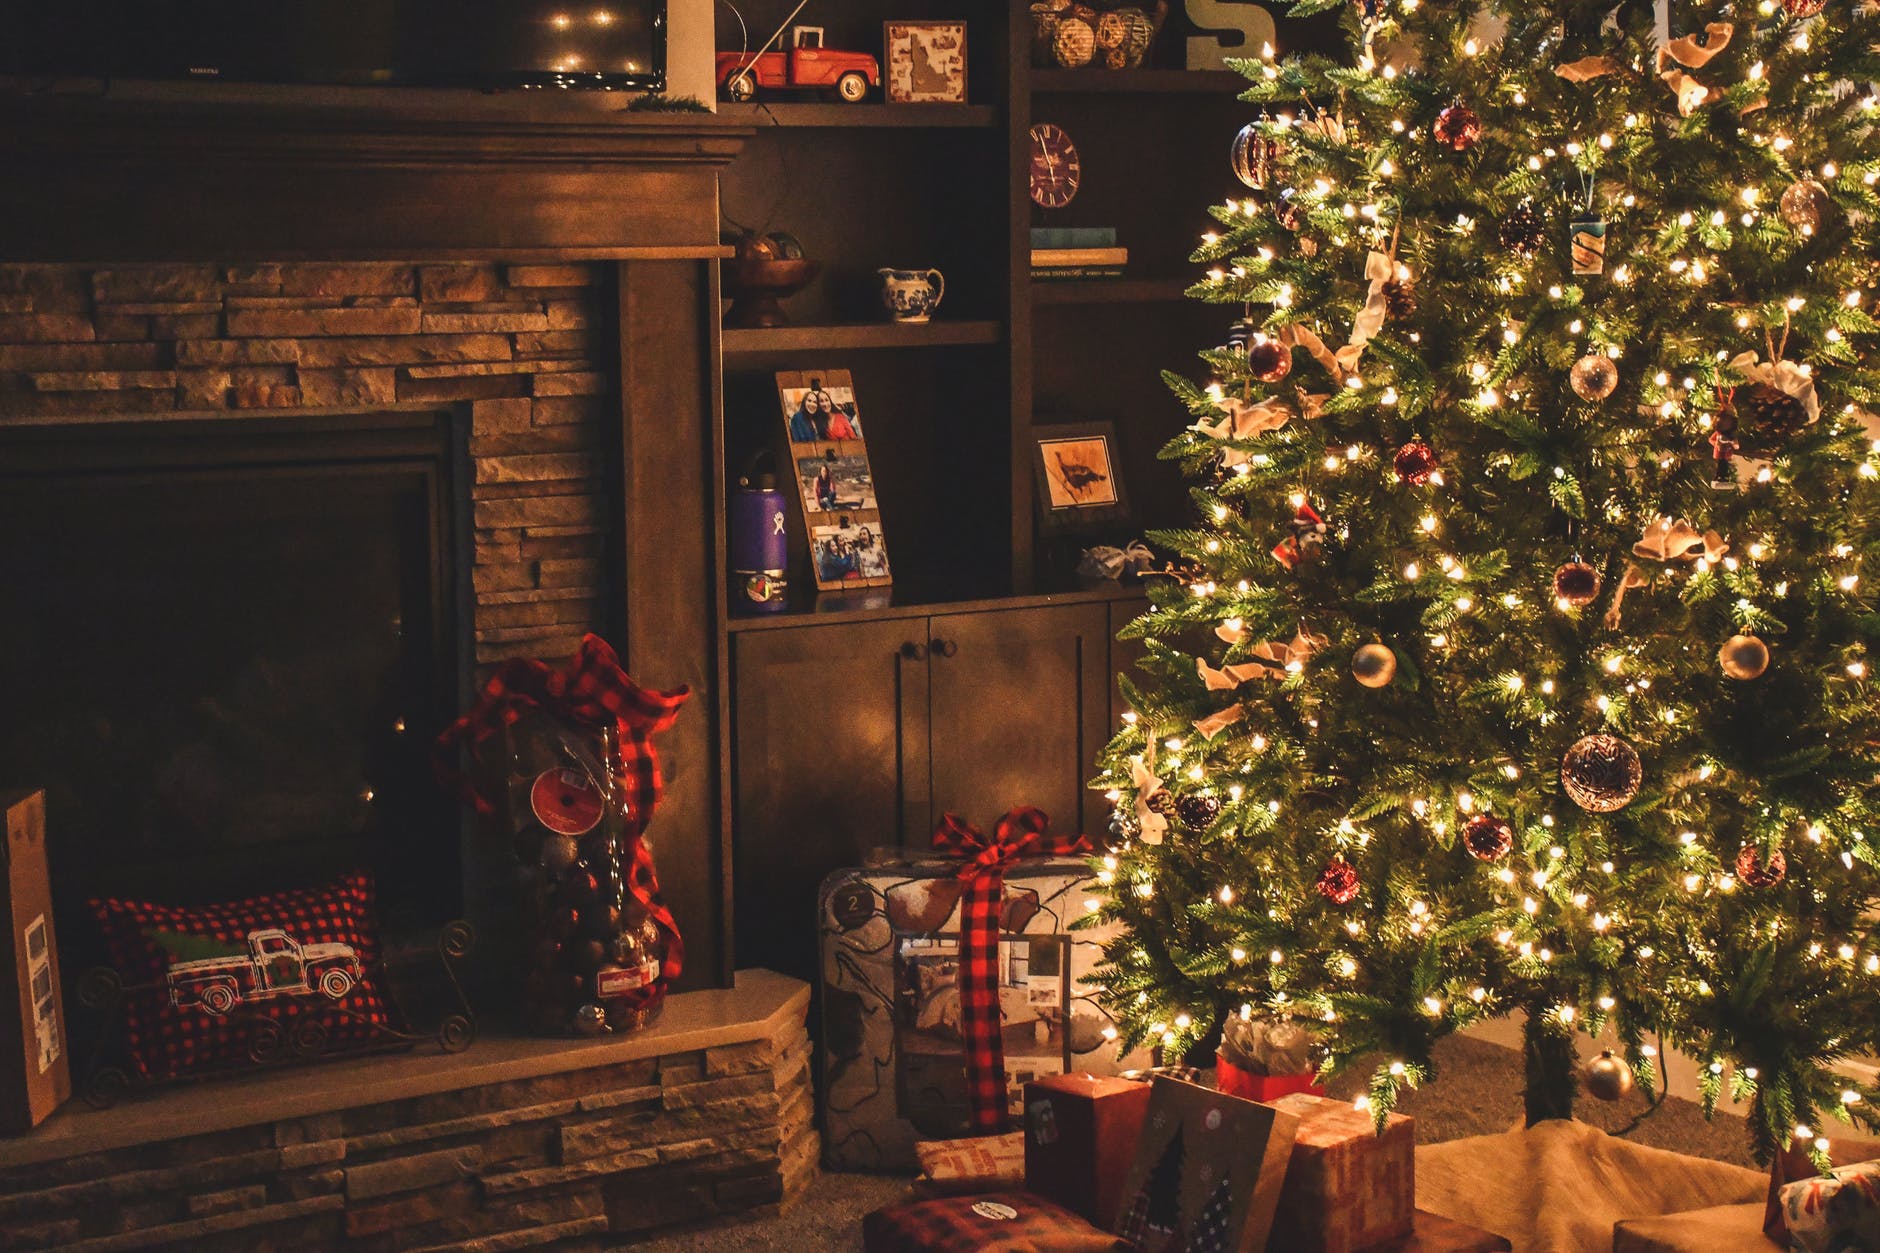 They placed Grandpa's gift next to the Christmas tree. | Source: Pexels